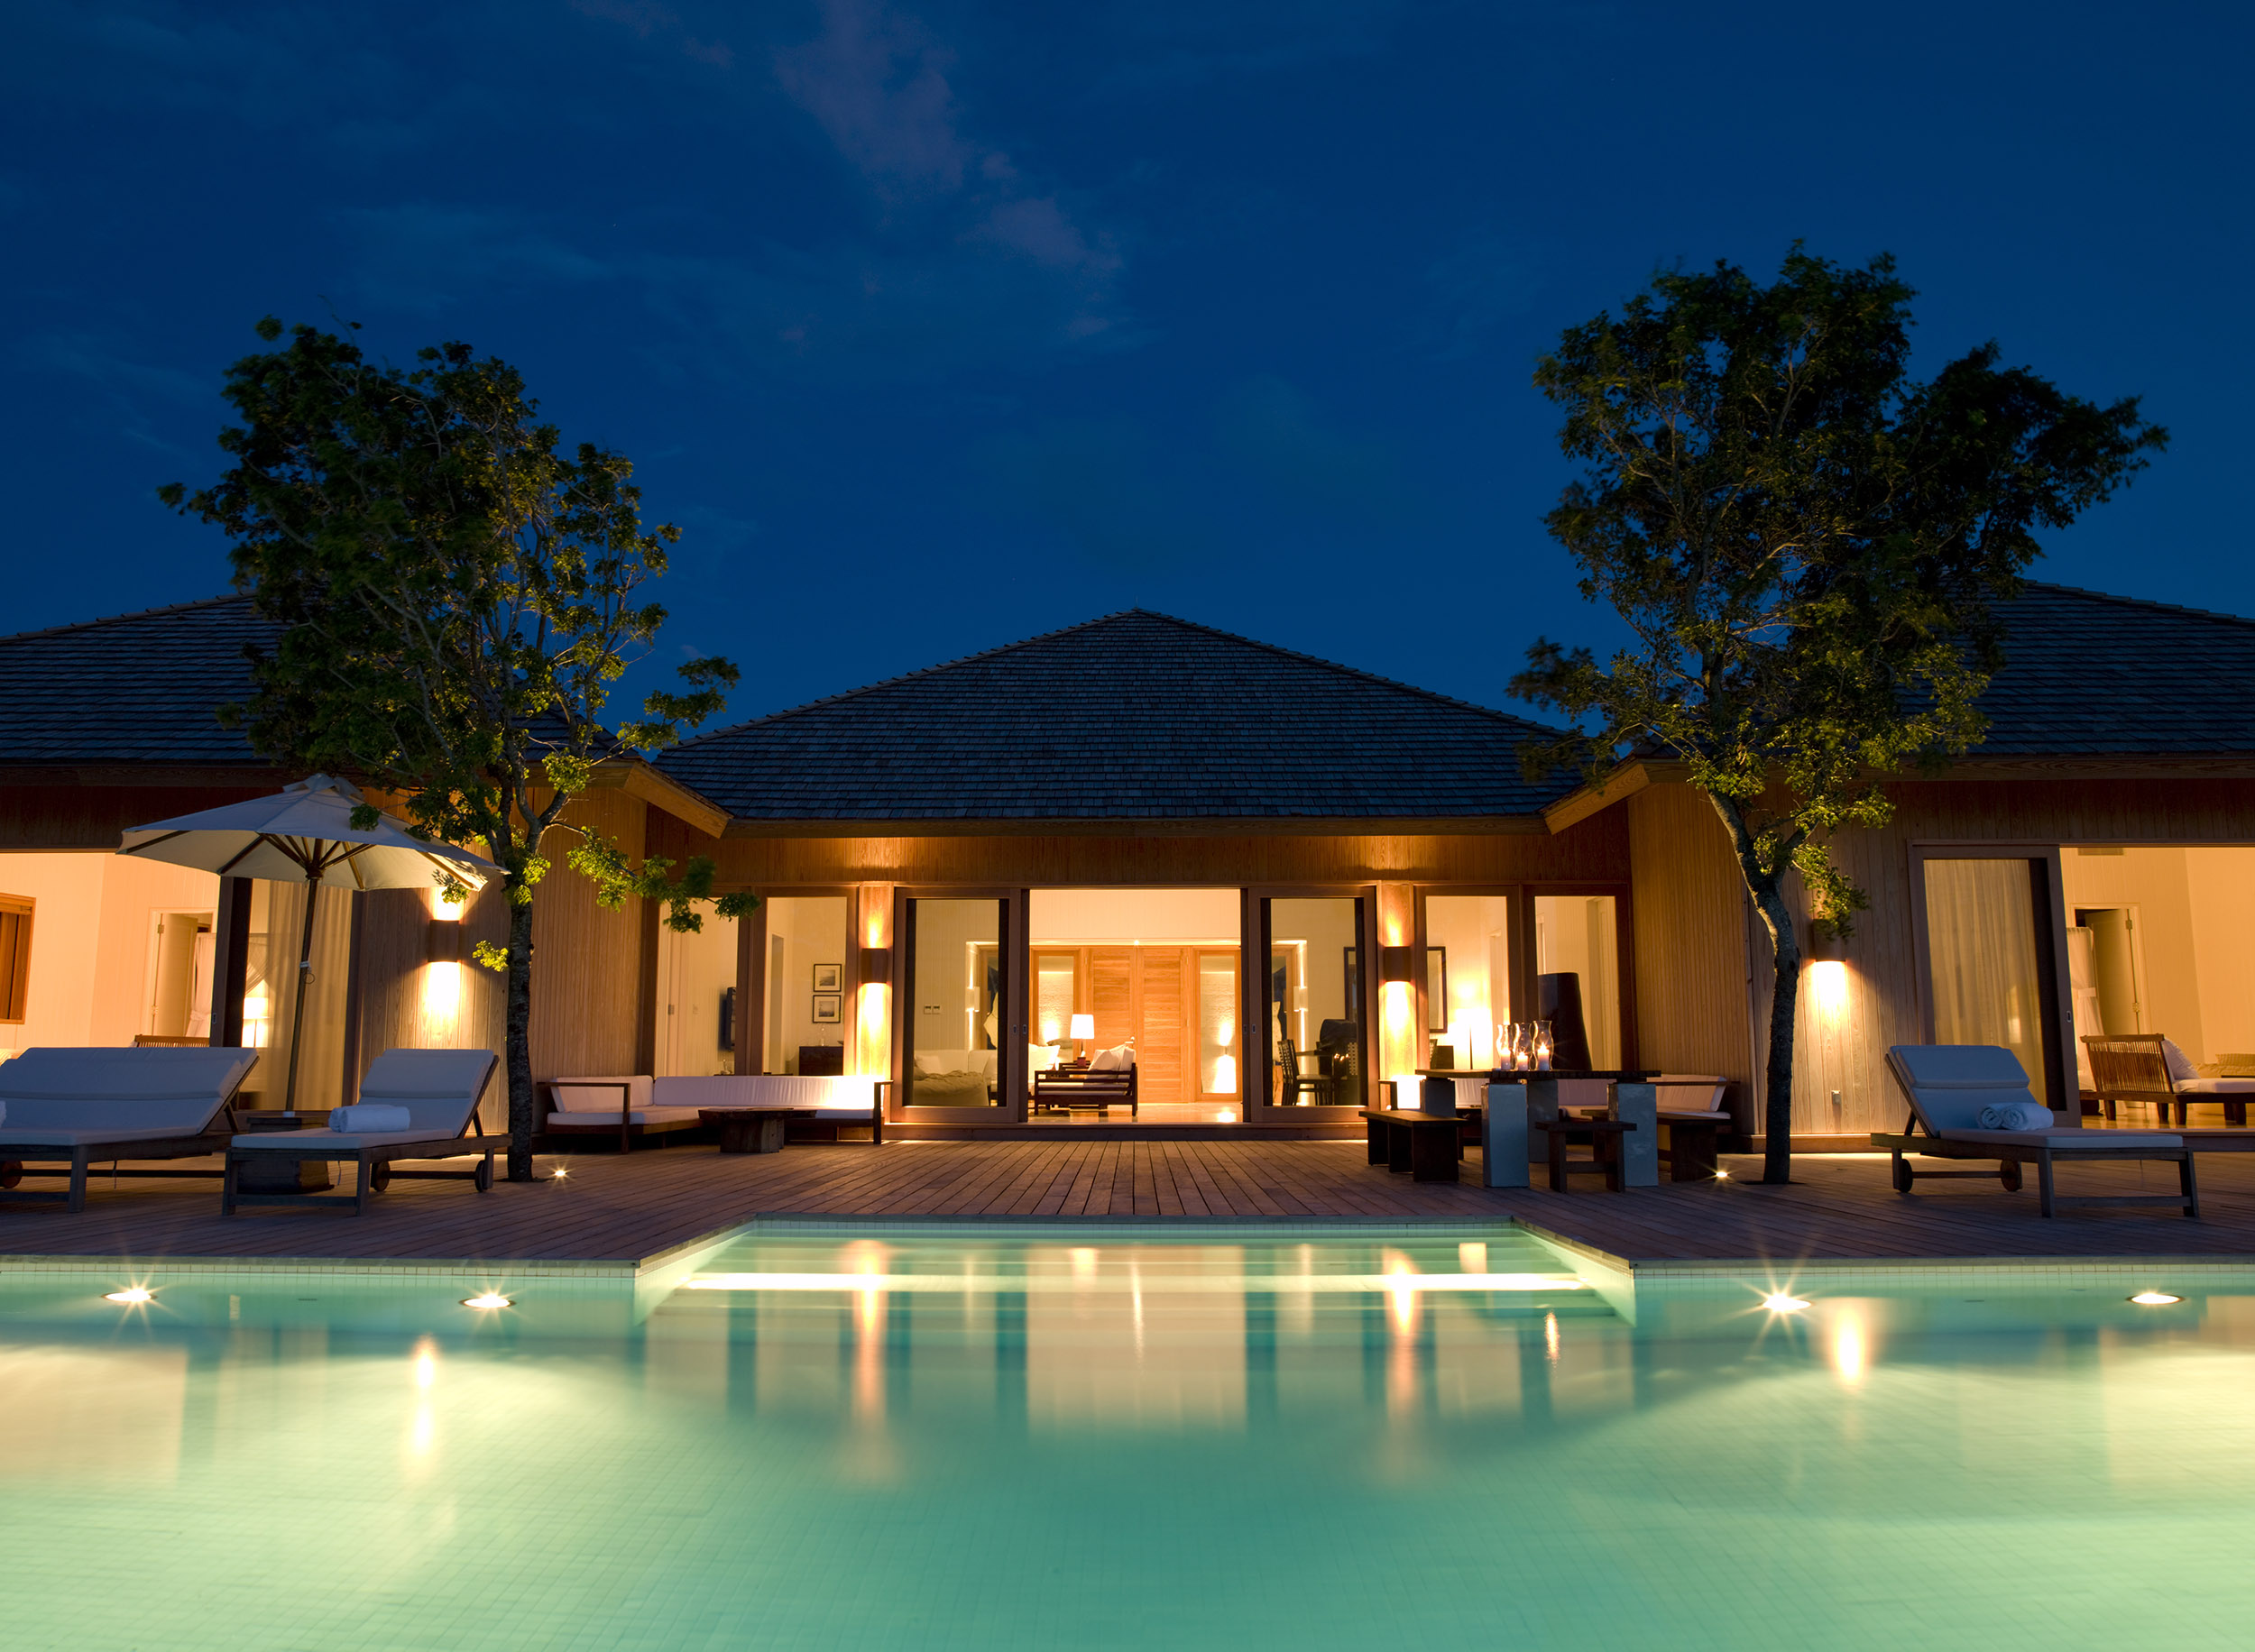 Parrot Cay - evening view of the villa and swimming pool